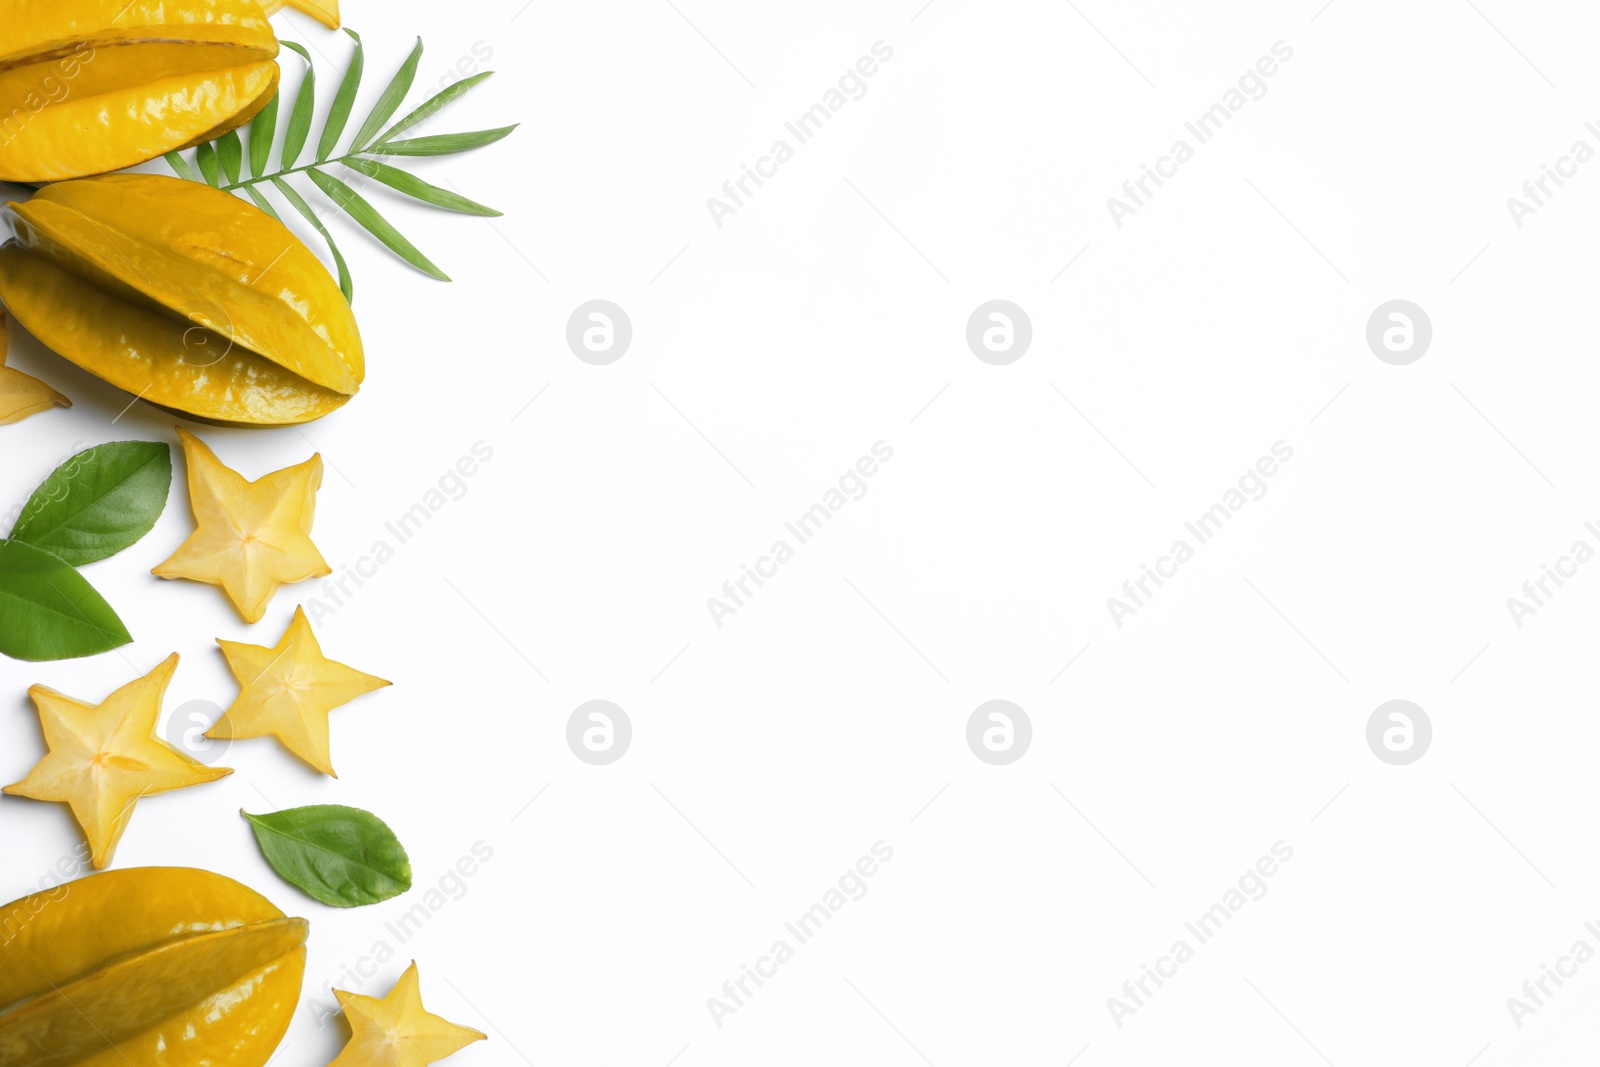 Photo of Delicious carambola fruits and leaves on white background, flat lay